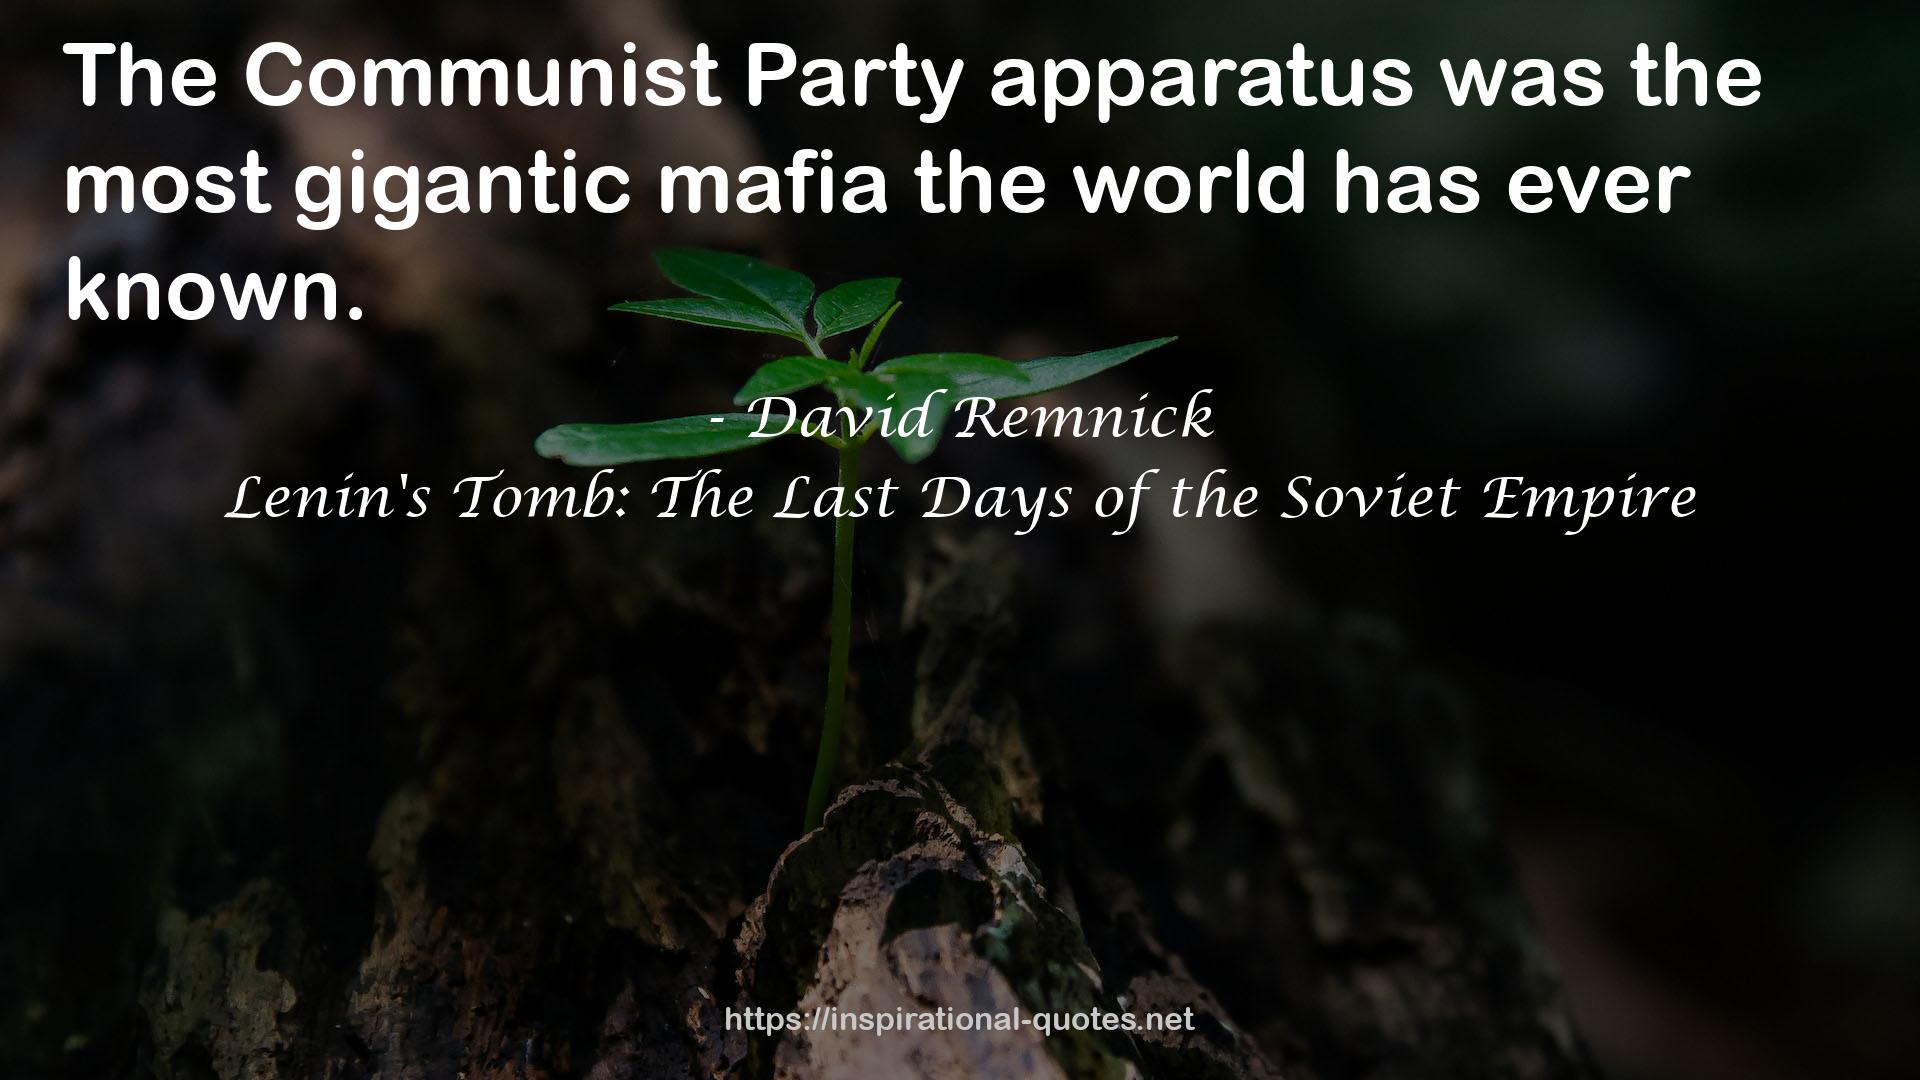 Lenin's Tomb: The Last Days of the Soviet Empire QUOTES